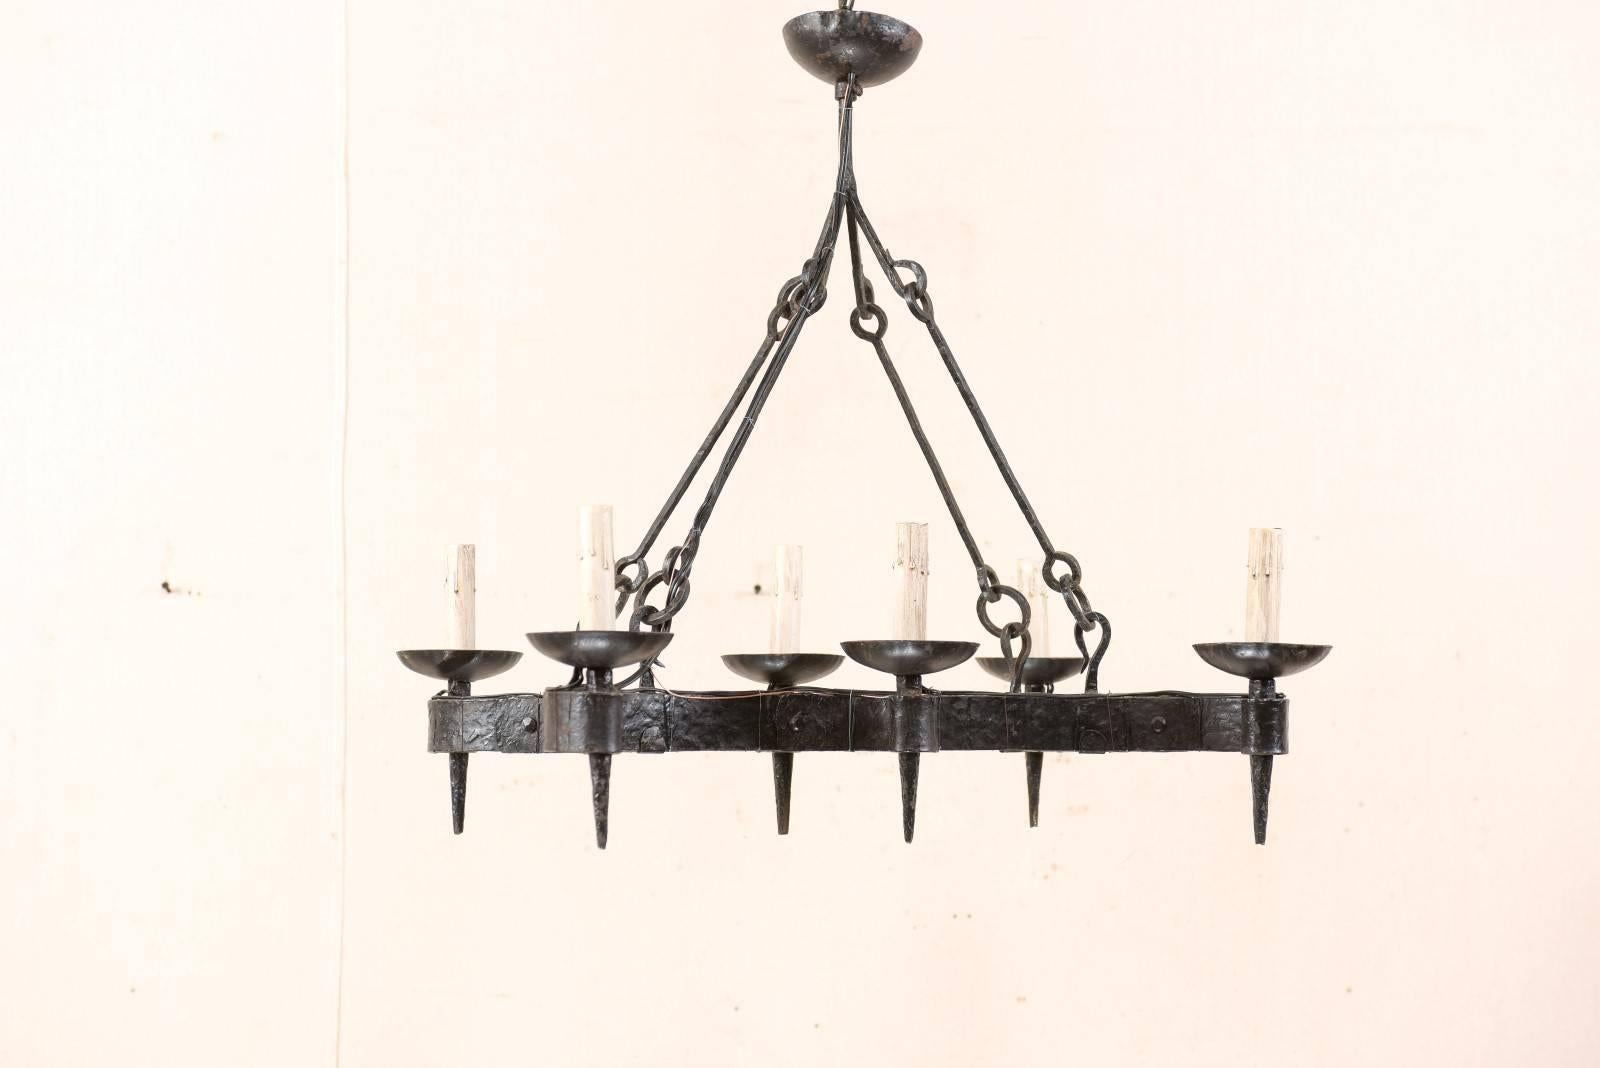 A French midcentury forged-iron six-light chandelier. This French vintage chandelier has an overall curvy, yet rectangular-shape. Six torch style lights, with iron cup style bobèches, are supported within the tightly scrolled arm extensions along